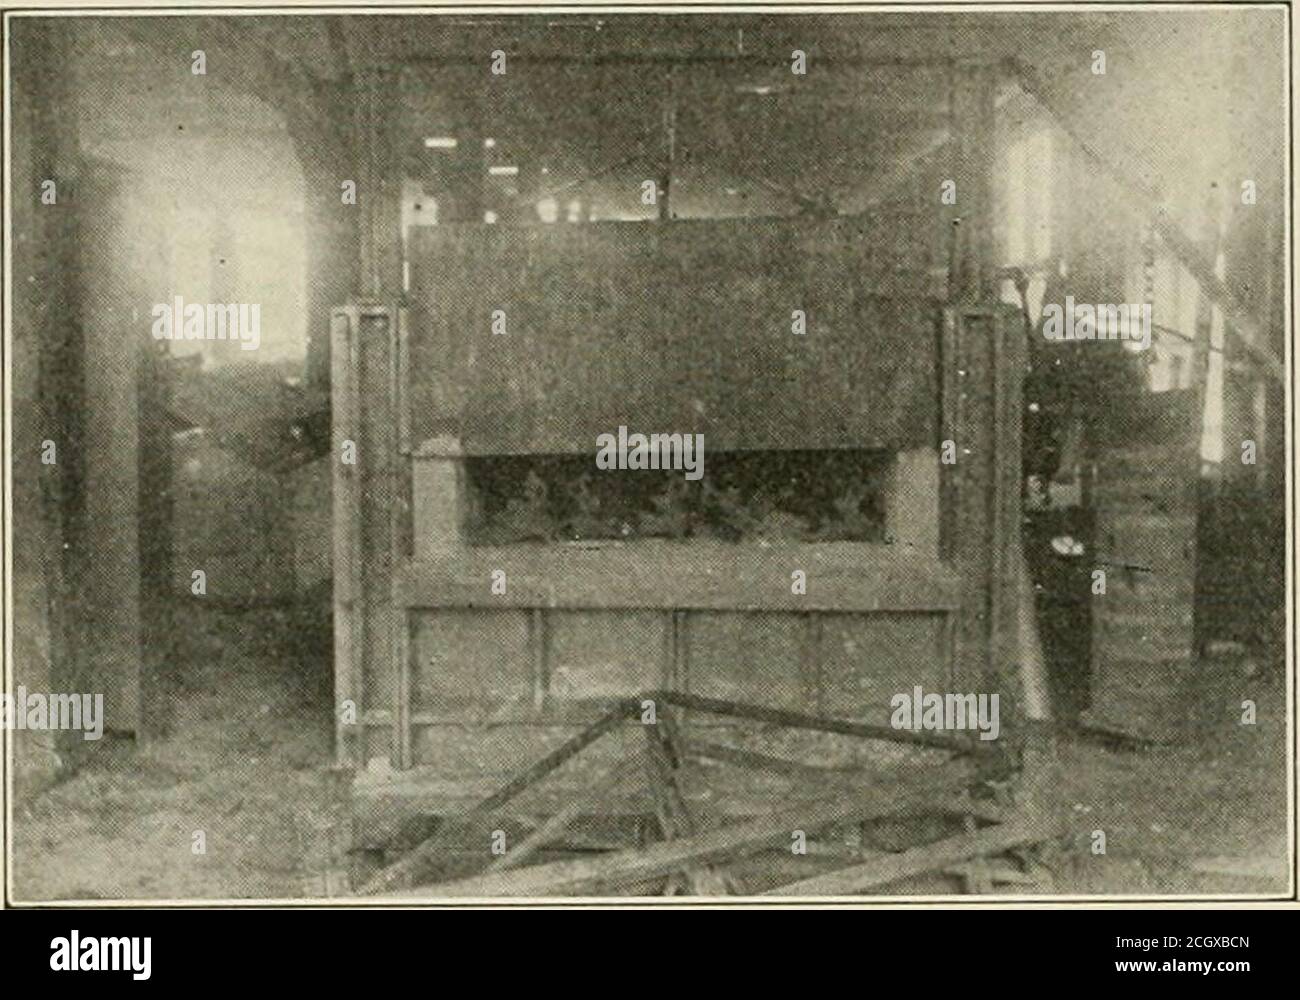 . Railway mechanical engineer . Fig. S^AIr-Operated Brake Beam Assembling Table We have in our cou[)Ier shop one |&gt;neumatic riveting ma-chine and one home-made |)neumatic rivet shearing machine,illustrated in Fig, 8, which shears the heads off the rivetswiiile they are in the cou()ler. The iiome-made machine 310 RAILWAY MECHANICAL ENGINEER Vol. 96, No. 6 consists of a substantial shear blade operated through along lever by a cylinder and plunger. The constructionof the machine is substantial as shown, enabling it to with-stand the more or less severe work of shearing coupler rivetheads. A s Stock Photo